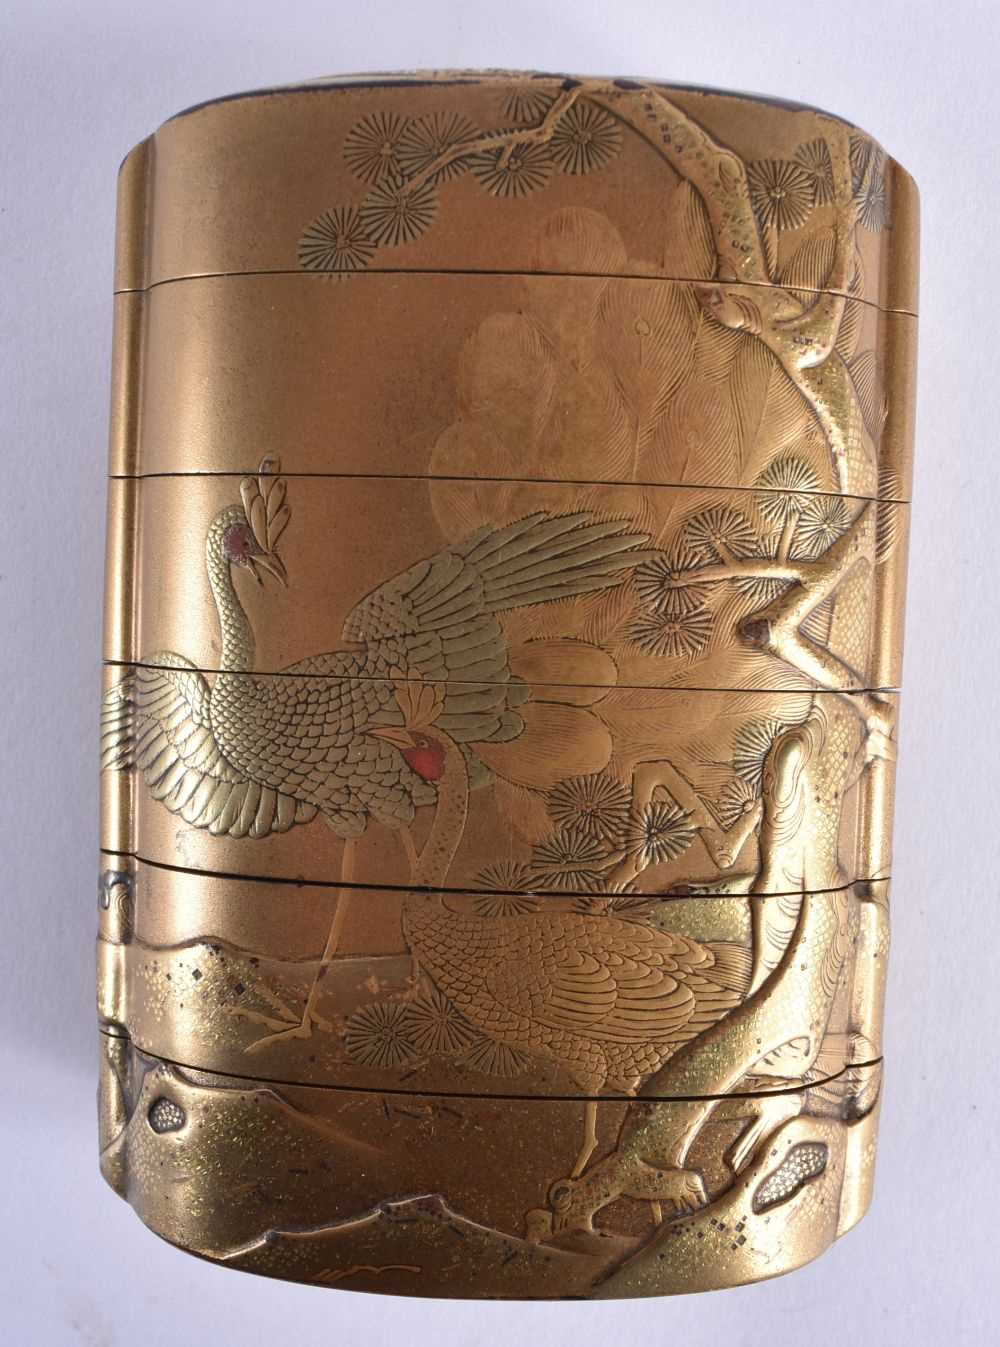 A FINE 19TH CENTURY JAPANESE MEIJI PERIOD GOLD LACQUER FIVE CASE INRO decorated with birds and